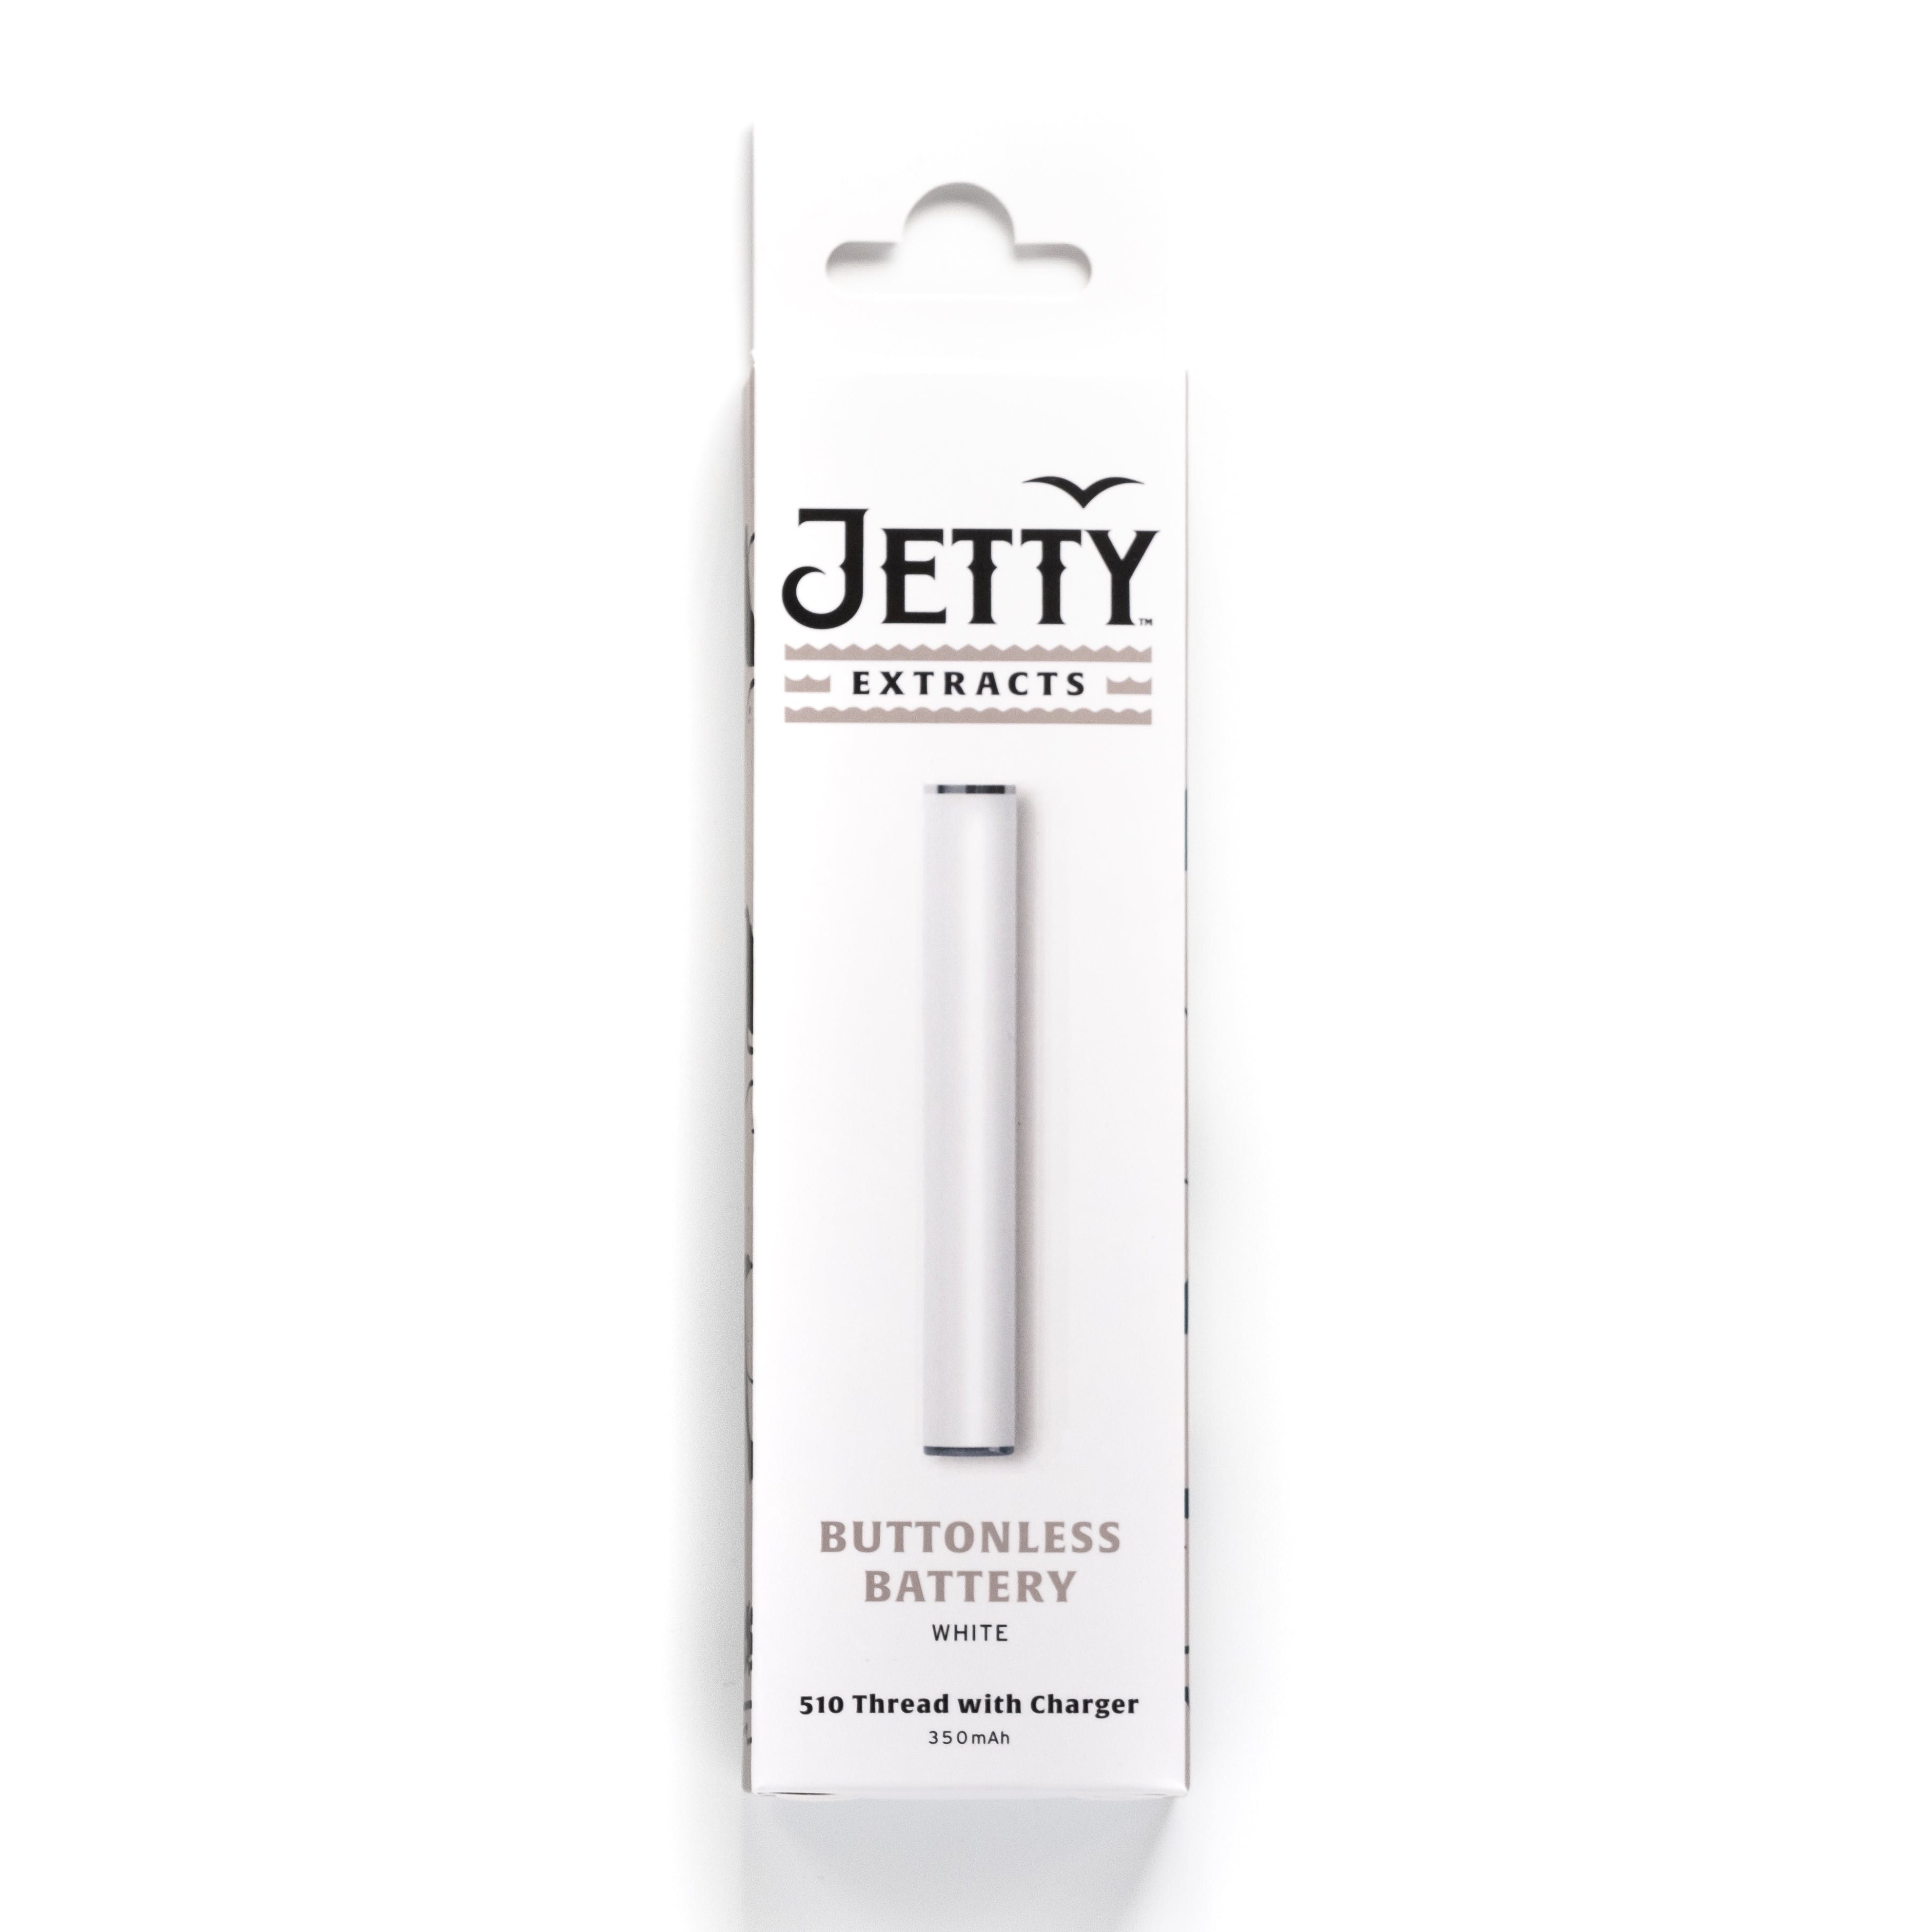 gear-white-vaping-battery-jetty-extracts